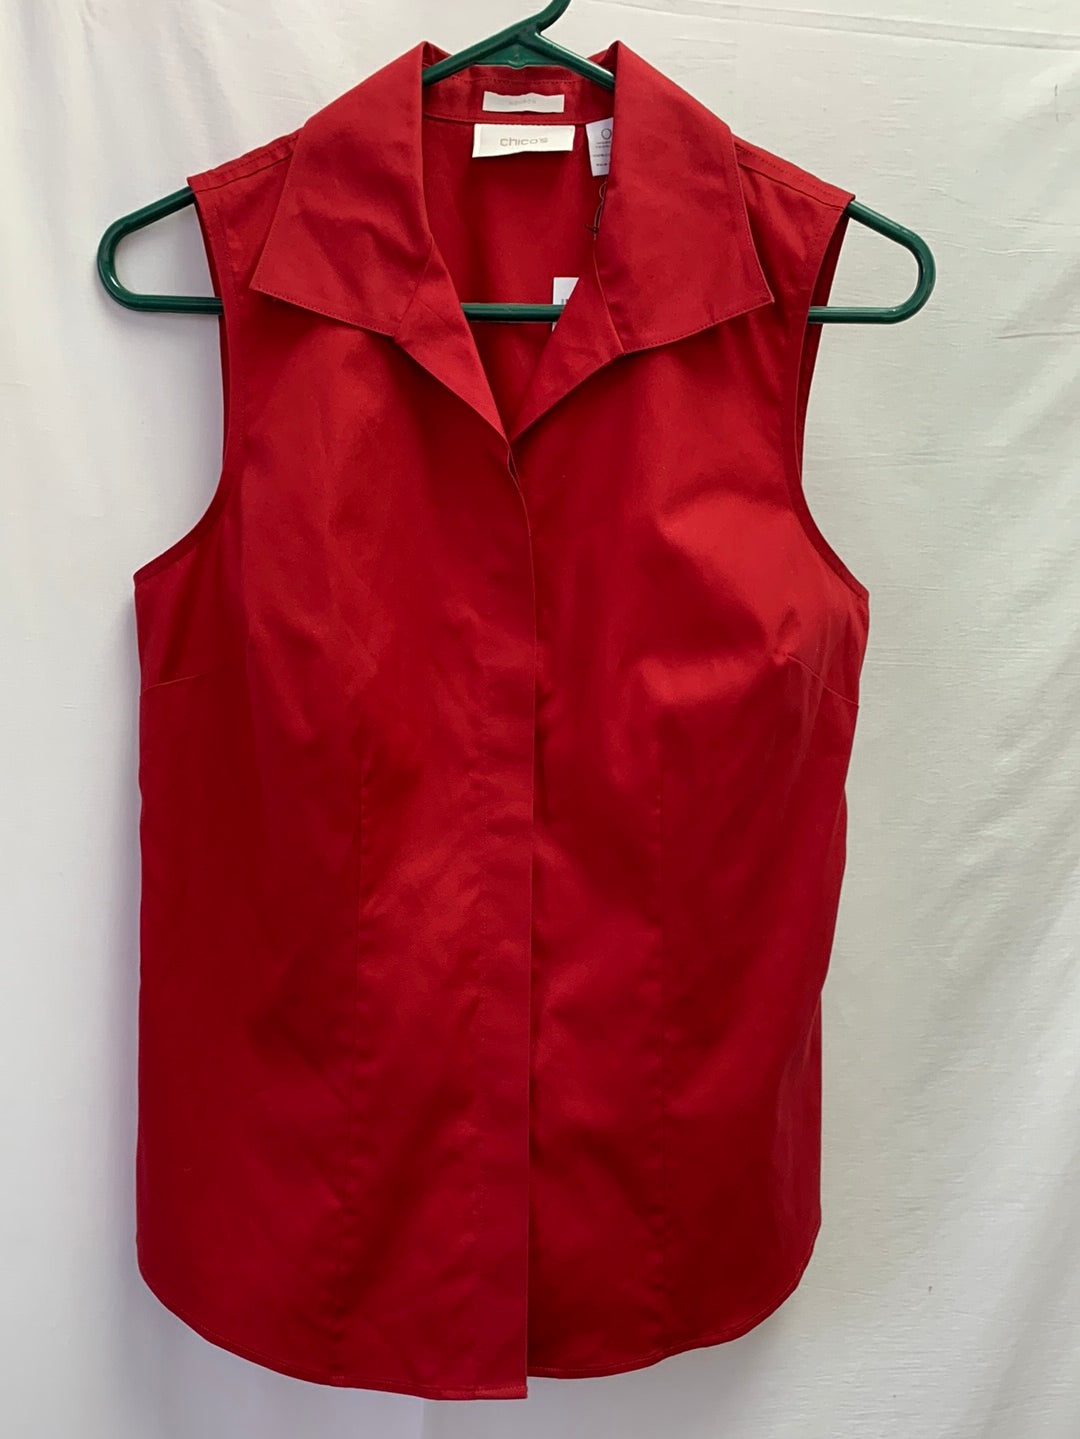 NWT - CHICO'S red No-Iron Effortless Cotton Sleeveless Collared Shirt - 0 (S 4/6)